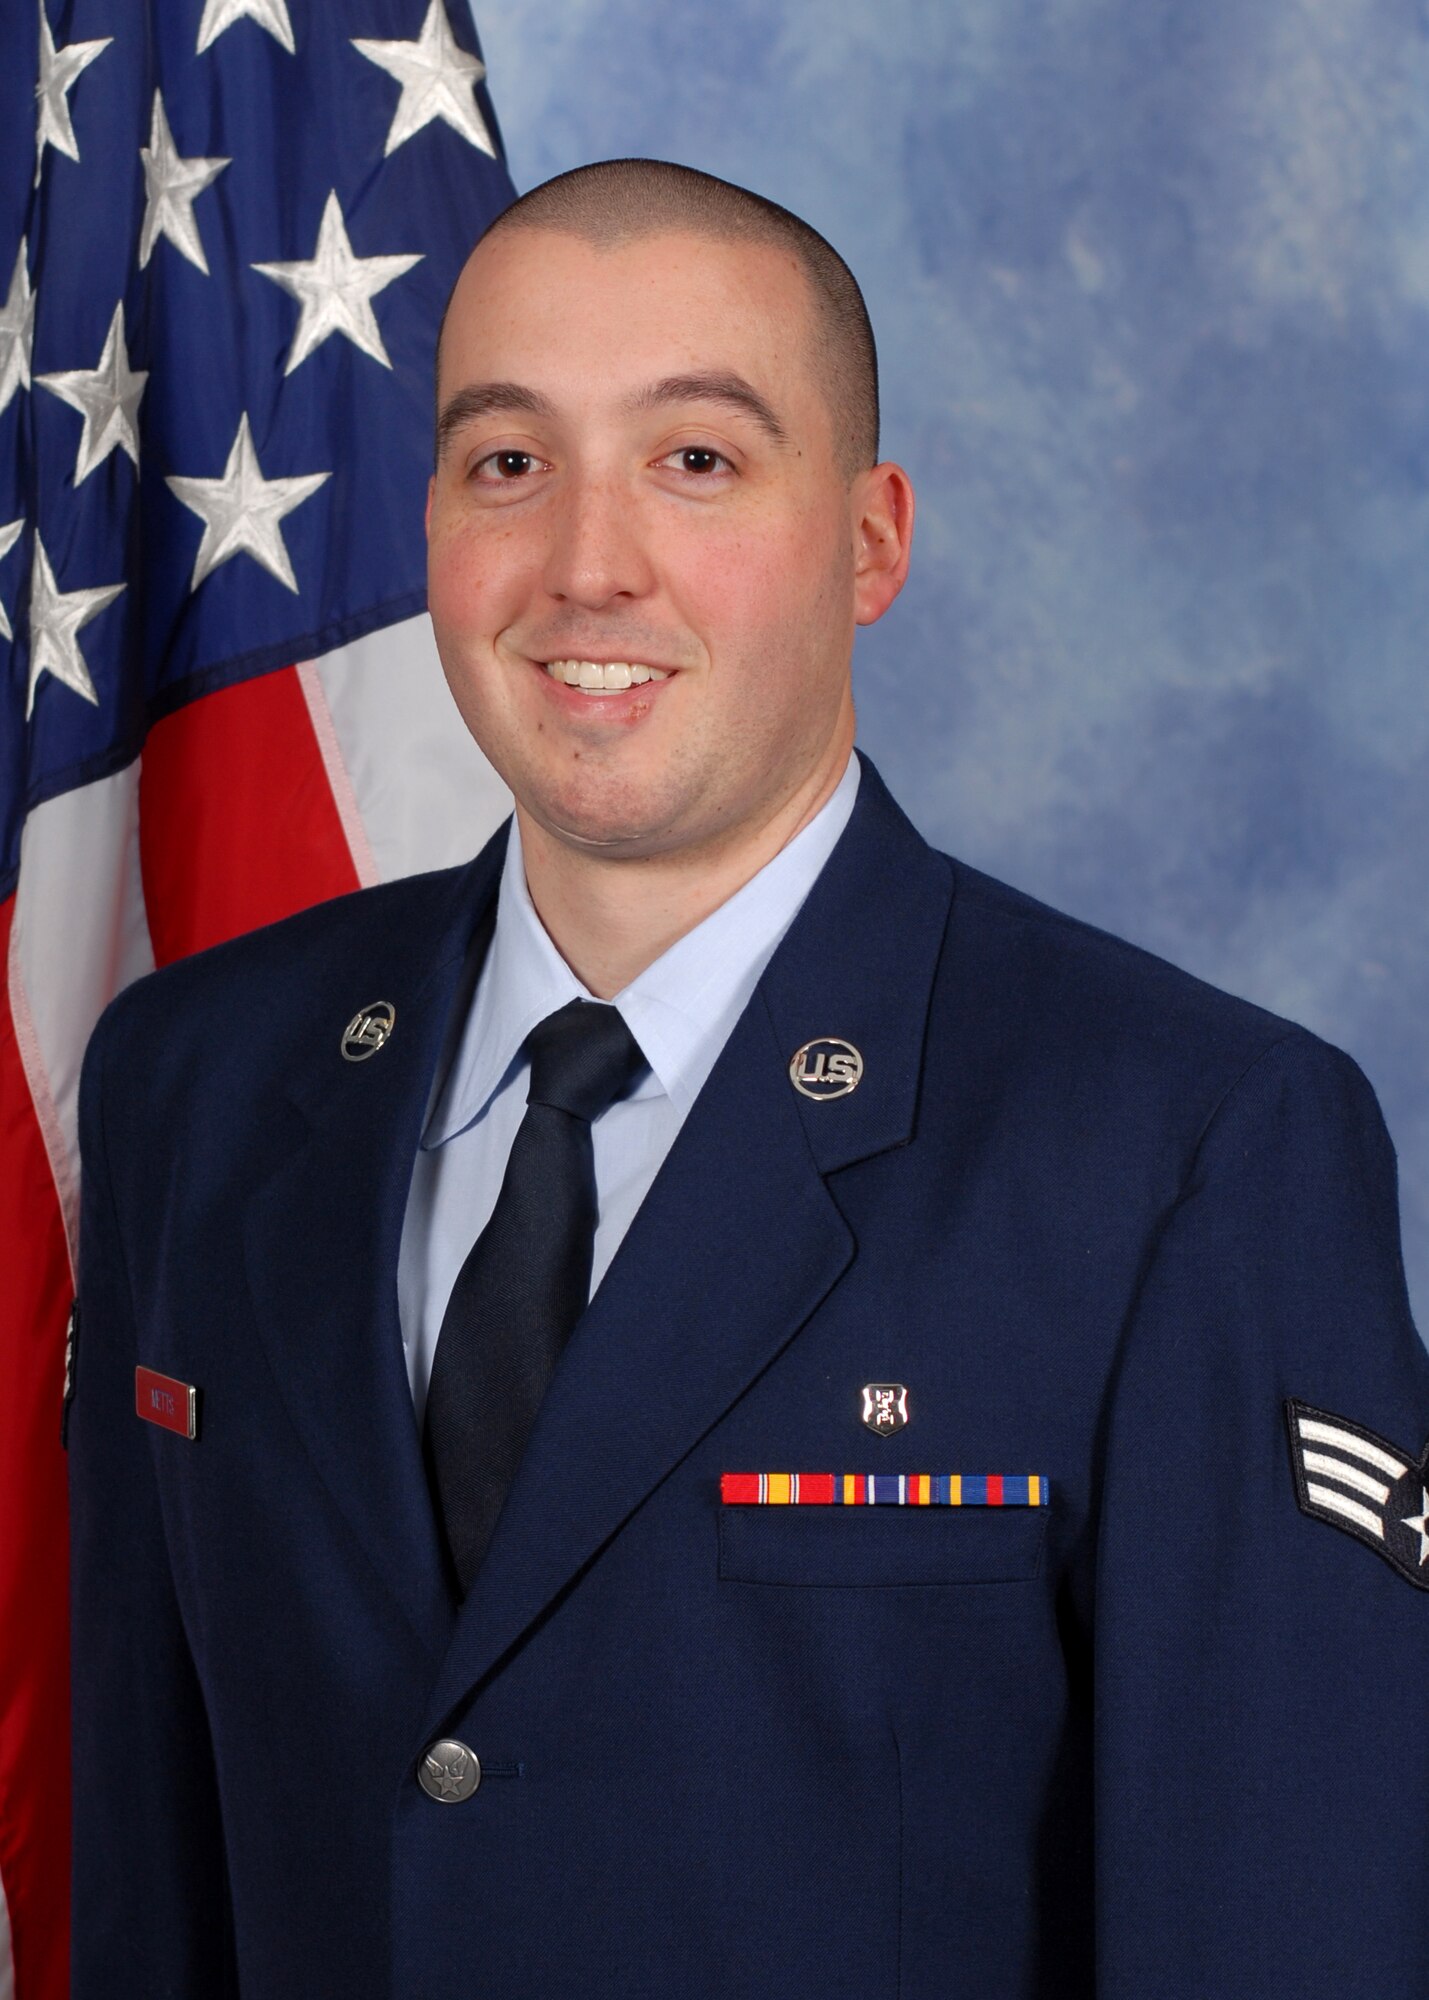 GOODFELLOW AIR FORCE BASE, Texas -- Senior Airman Charles A. Metts III, 17th Medical Operations Squadron, is the 17th Training Wing 2013 Airman of the Year and the Team Goodfellow Junior Service Member of the Year. (U.S. Air Force photo/ 17th Training Wing Public Affairs)